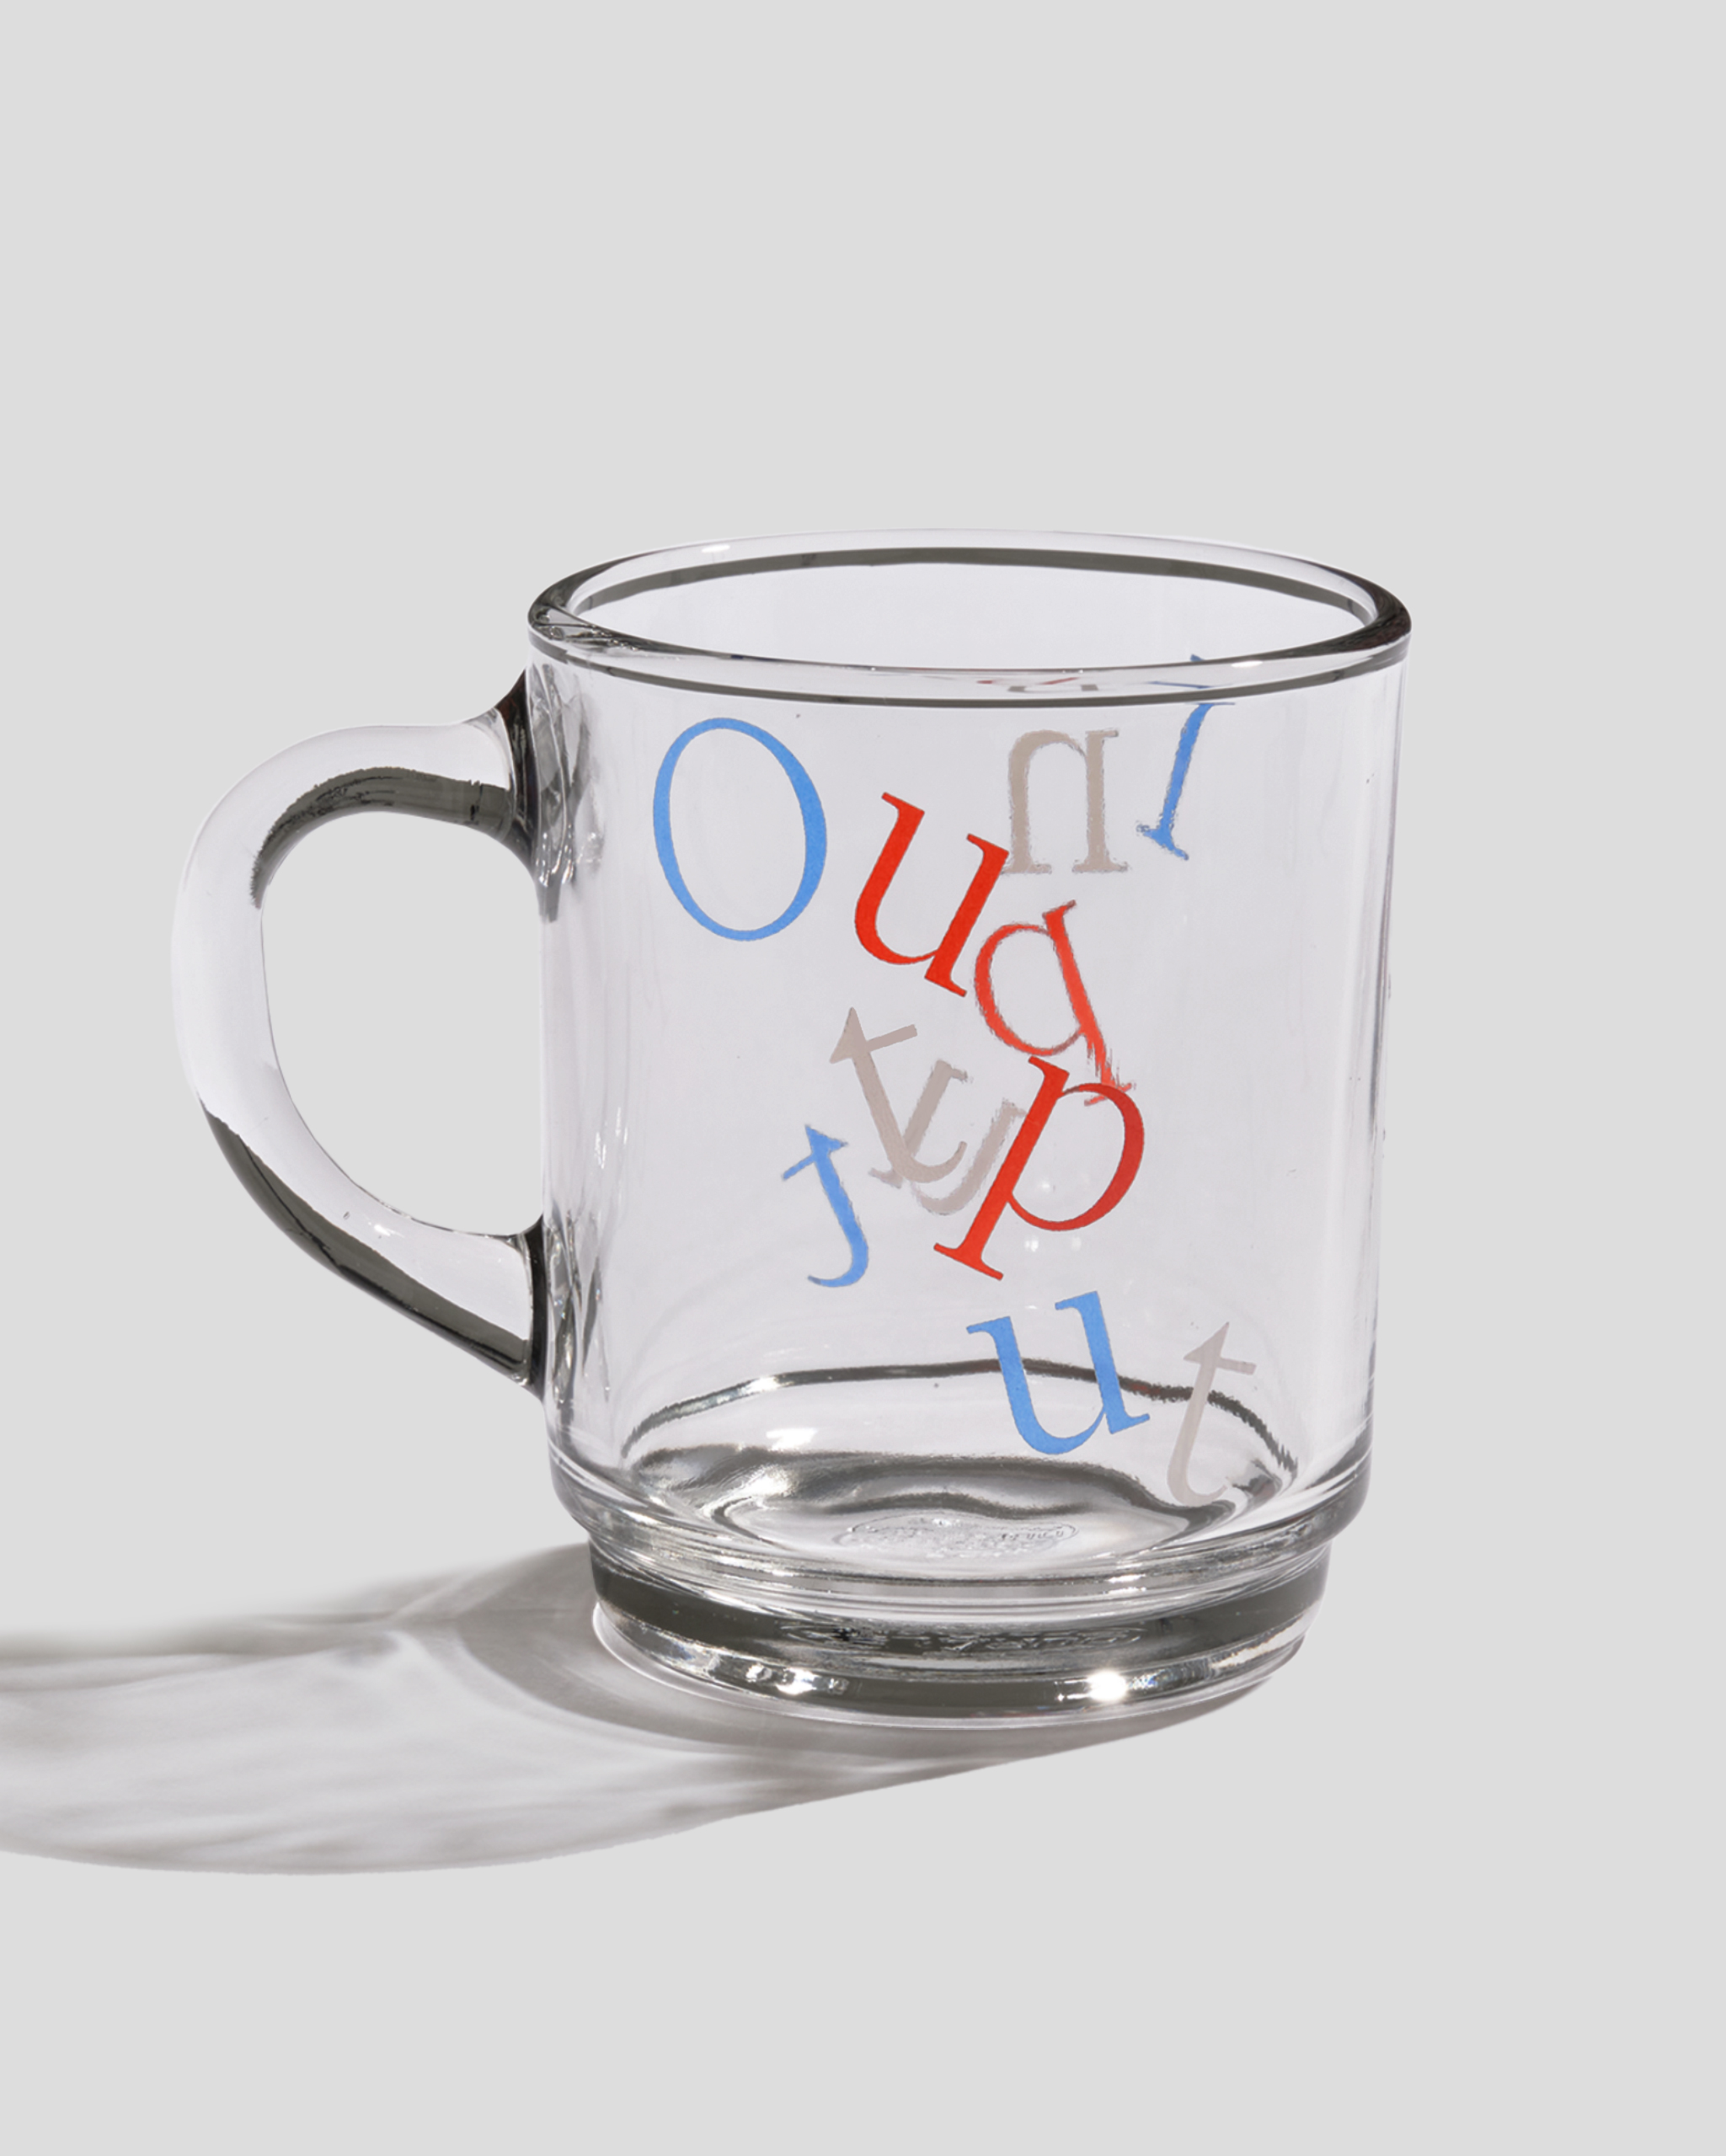 Input & Output Cup in White